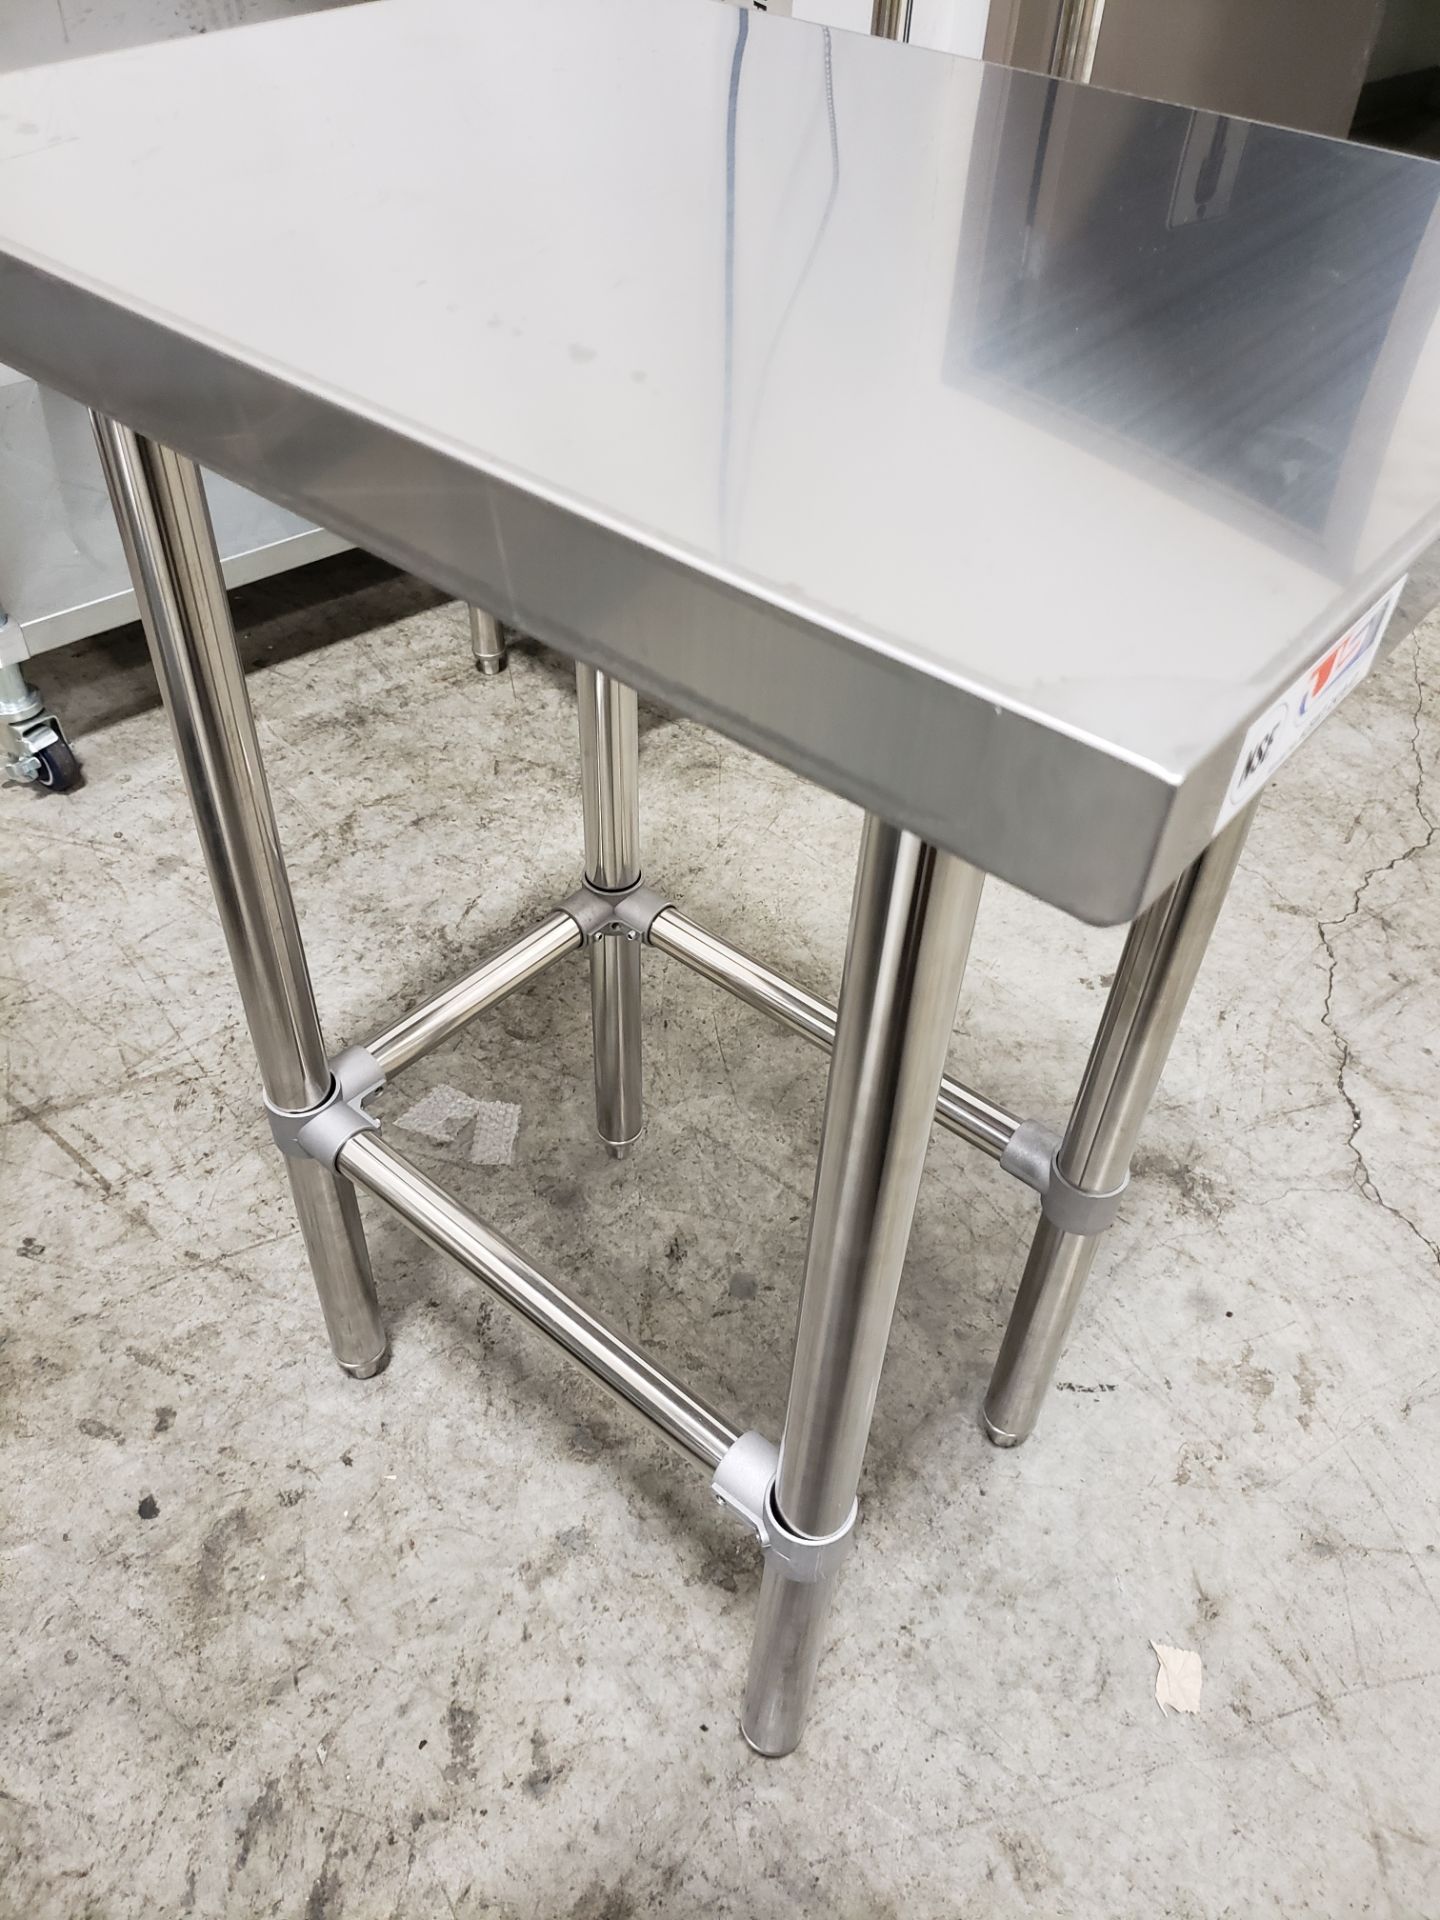 18" x 24" All Stainless Work Table with Tube Base Legs - 34" High - Image 3 of 3